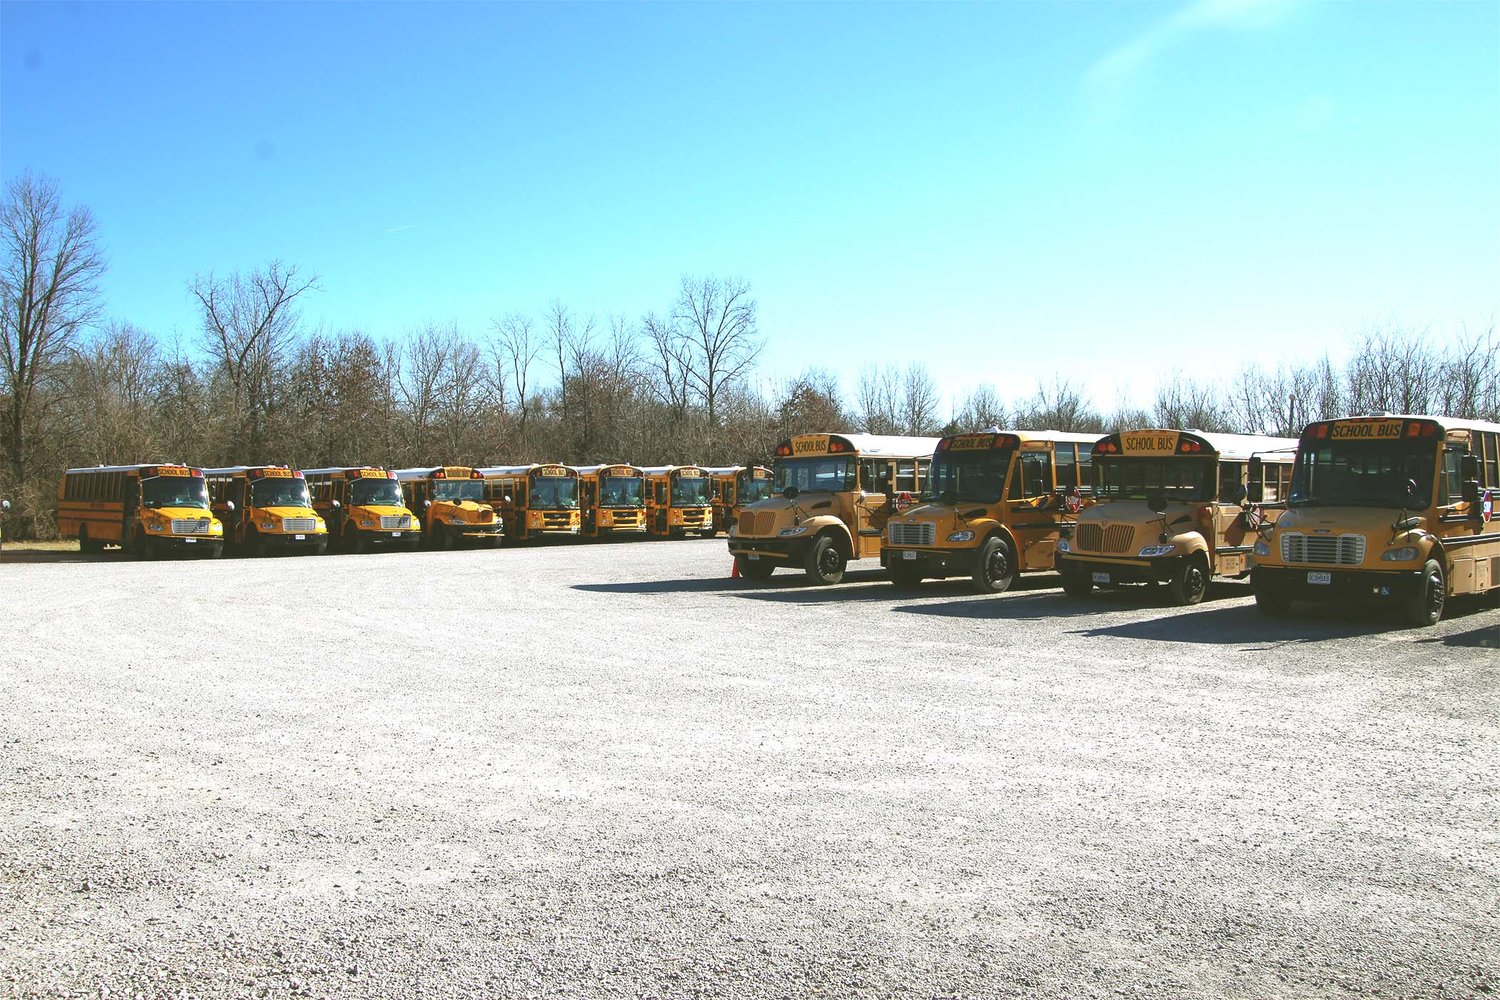 The Bus Barn on Park Avenue shows many empty buses during the afternoon before school lets out for the day.